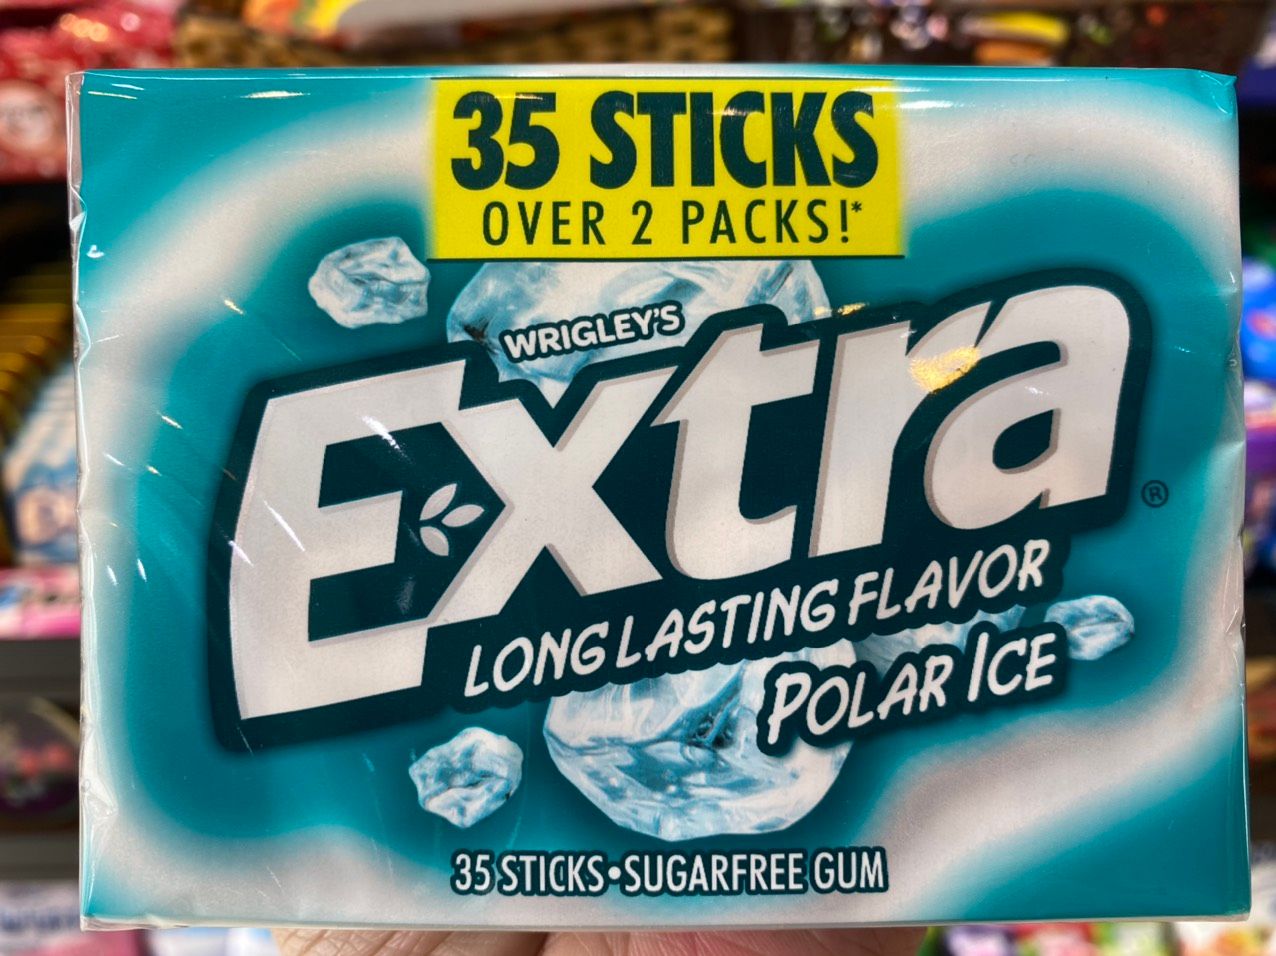  Gum Extra Long Lasting Flavor Polar Ice Hộp 35 Thanh 